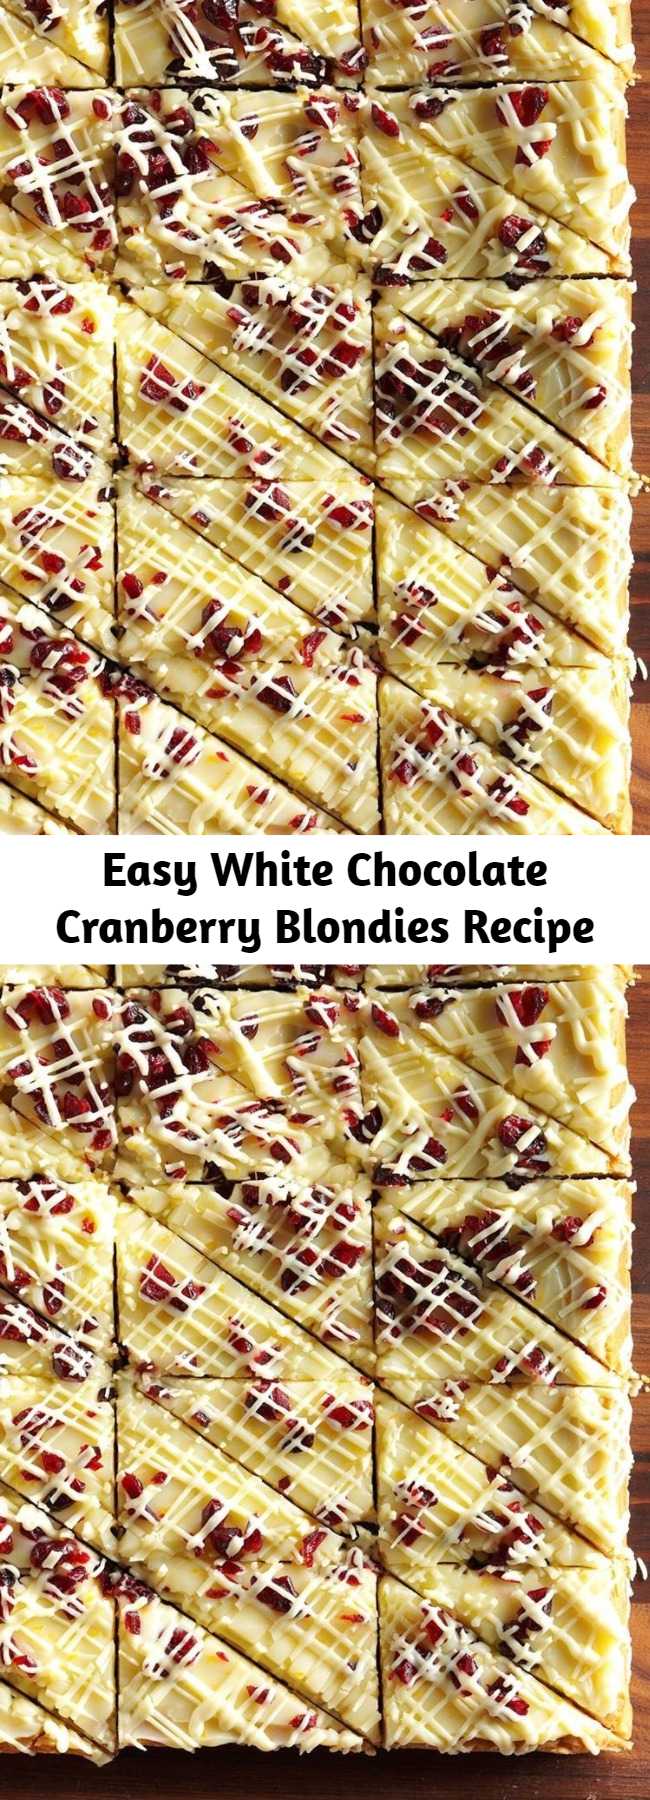 Easy White Chocolate Cranberry Blondies Recipe - For a fancier presentation, I cut the bars into triangle shapes and drizzle white chocolate over each one individually.